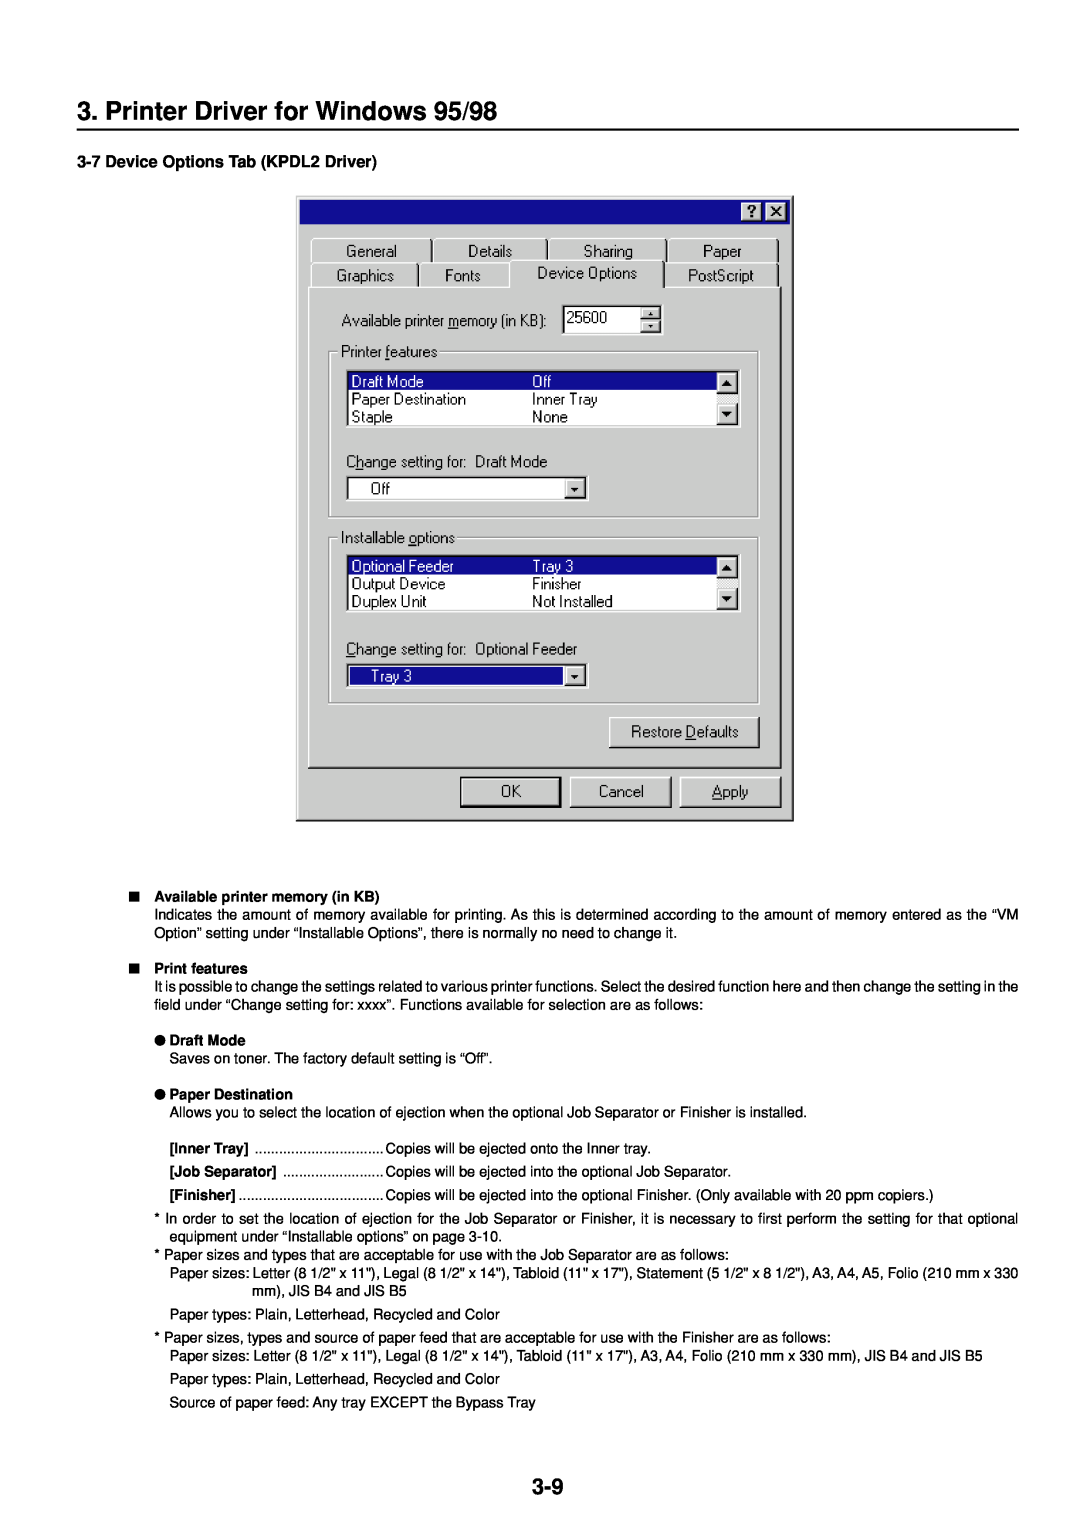 IBM Printing System Printer Driver for Windows 95/98, Device Options Tab KPDL2 Driver, Available printer memory in KB 